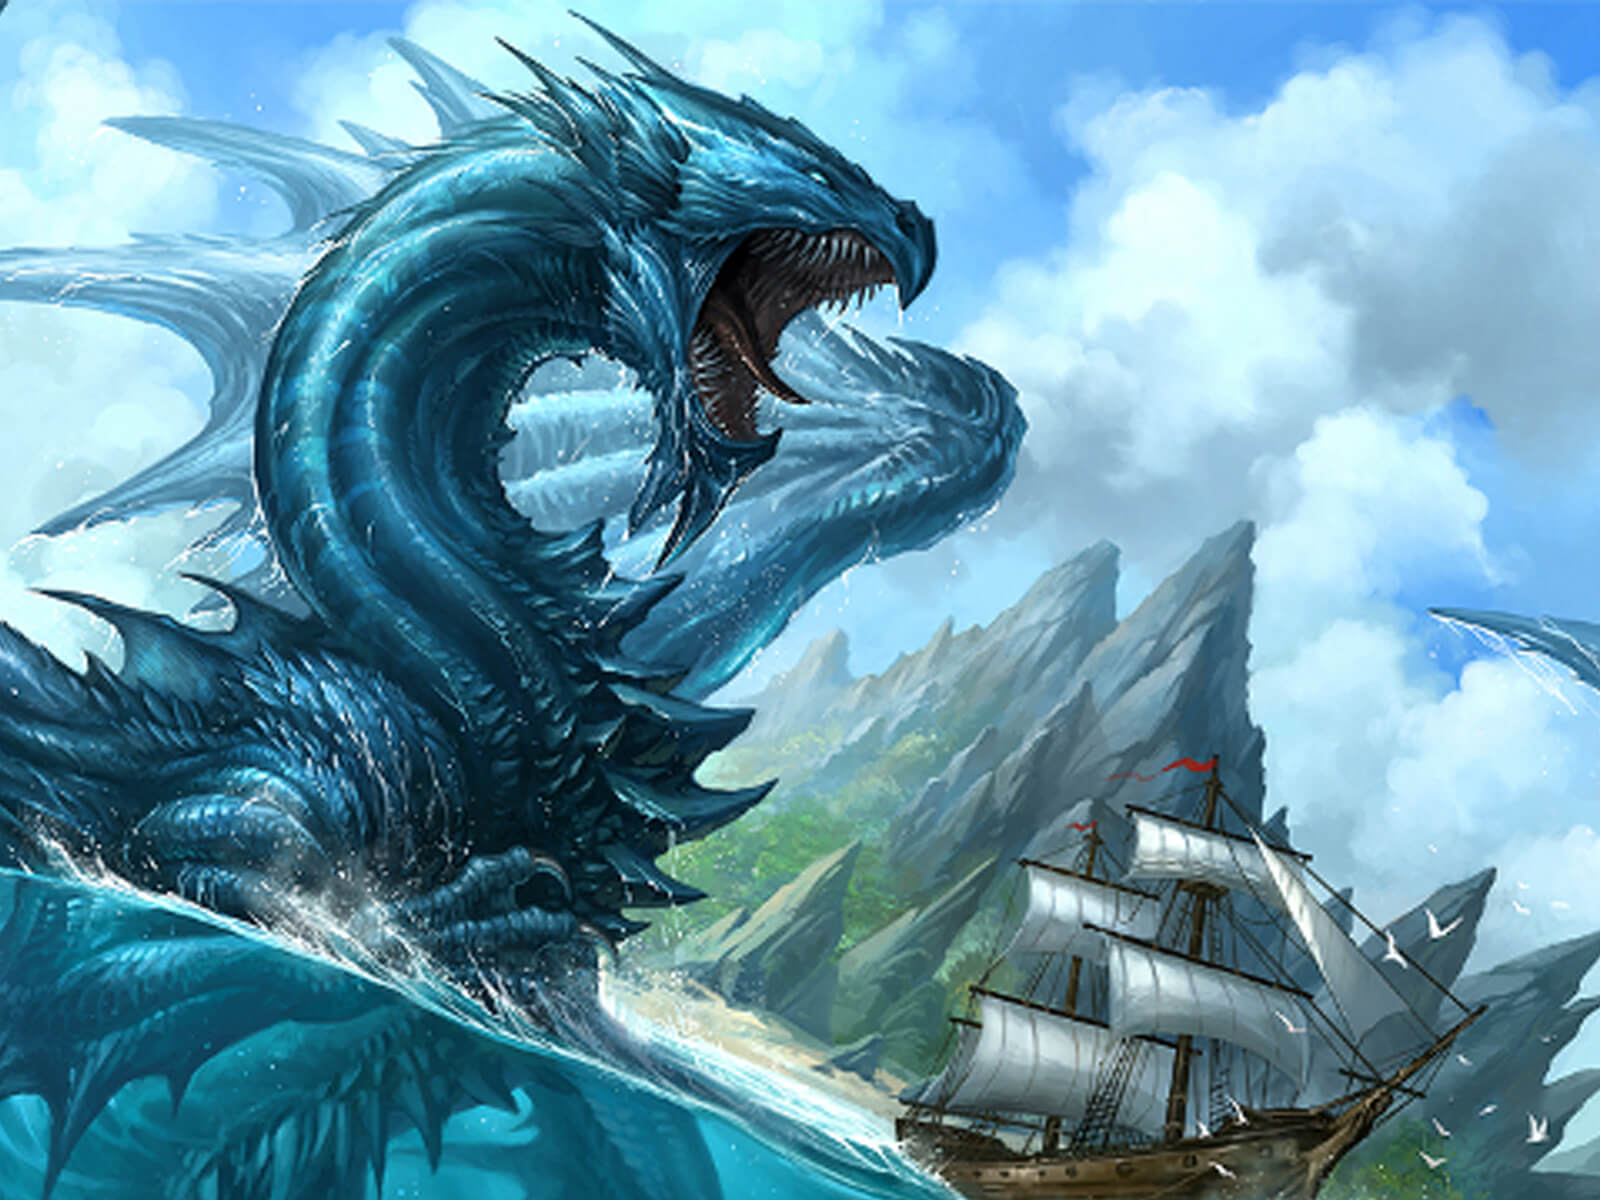 A blue dragon swimming in the ocean, about to pounce upon a galleon with a rocky island behind